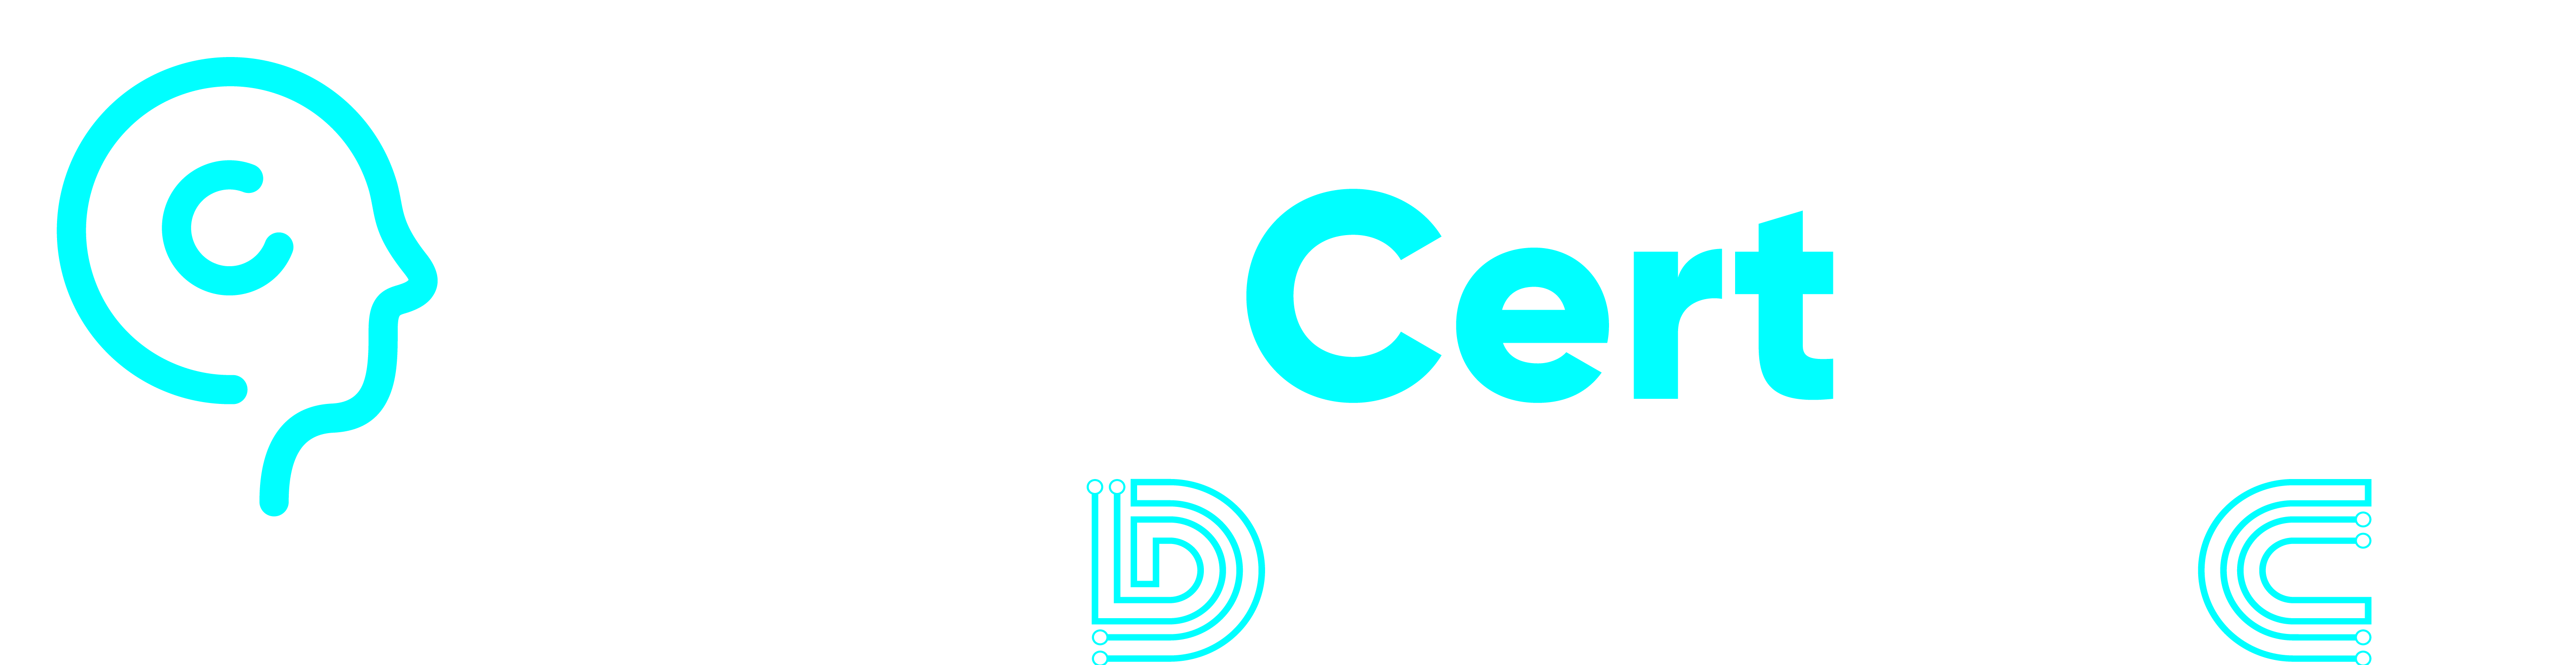 OpenCertHub DigiCredential 區塊鏈證書